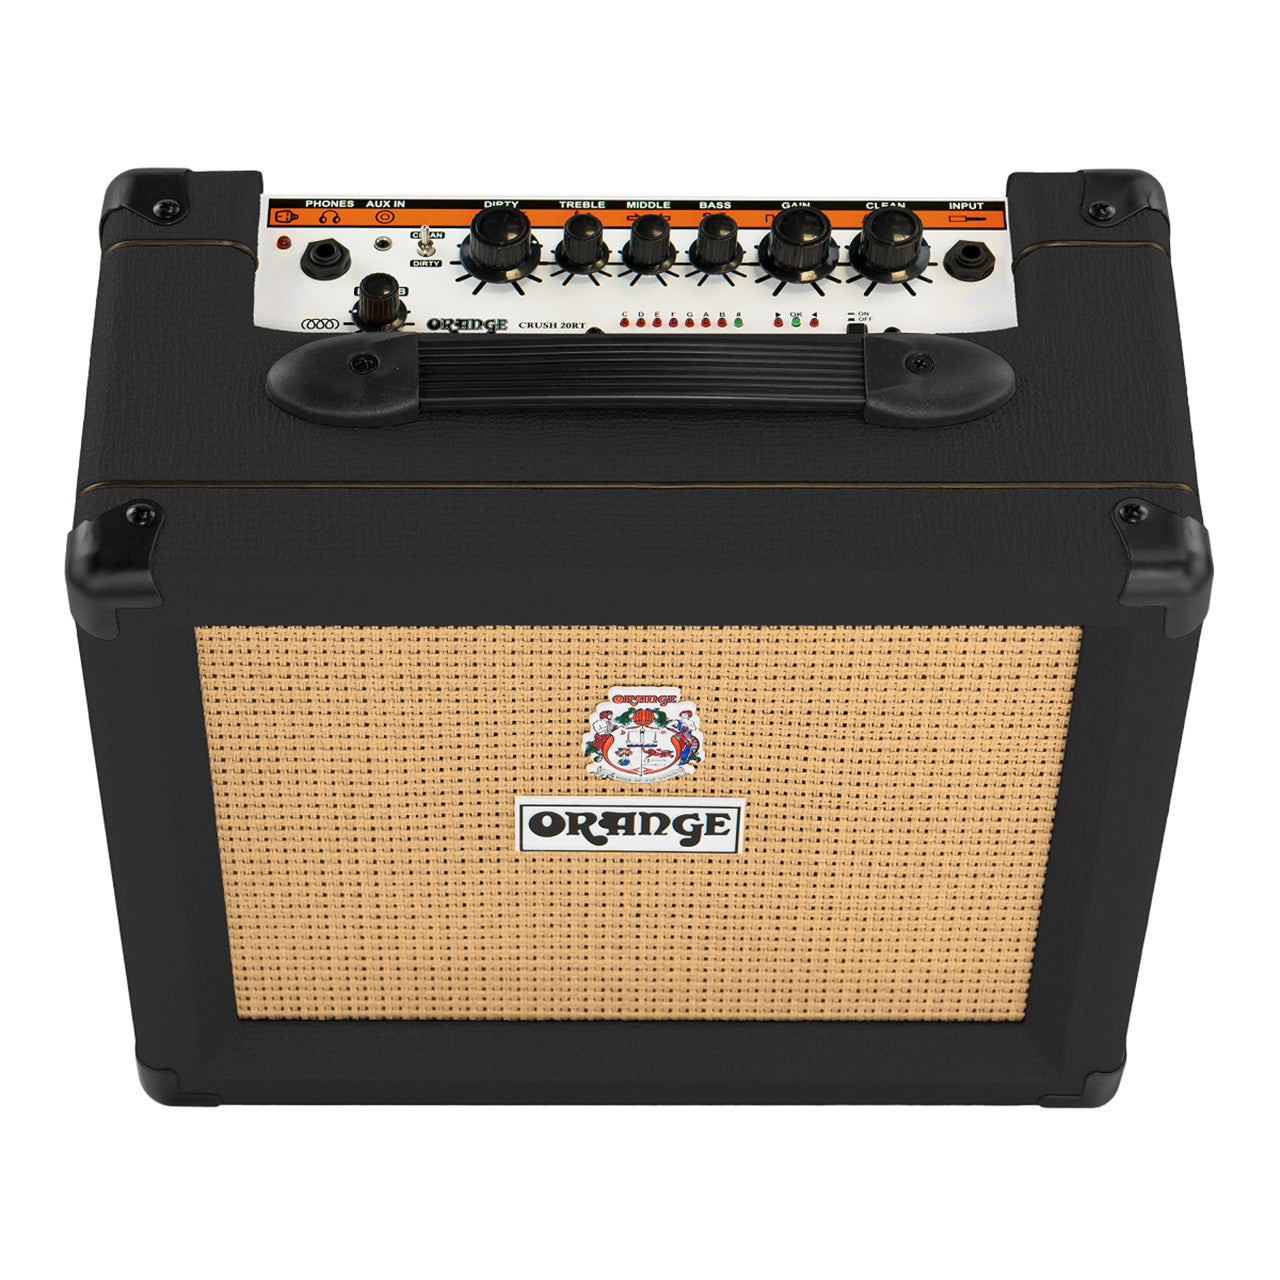 Orange Amps Crush Series 20W 2-Channel Solid State Guitar Combo Amplifier with 3-Band Equalizer, Chromatic Tuner and Headphone Output (Orange, Black) | 20/20RT, 20RT/BK